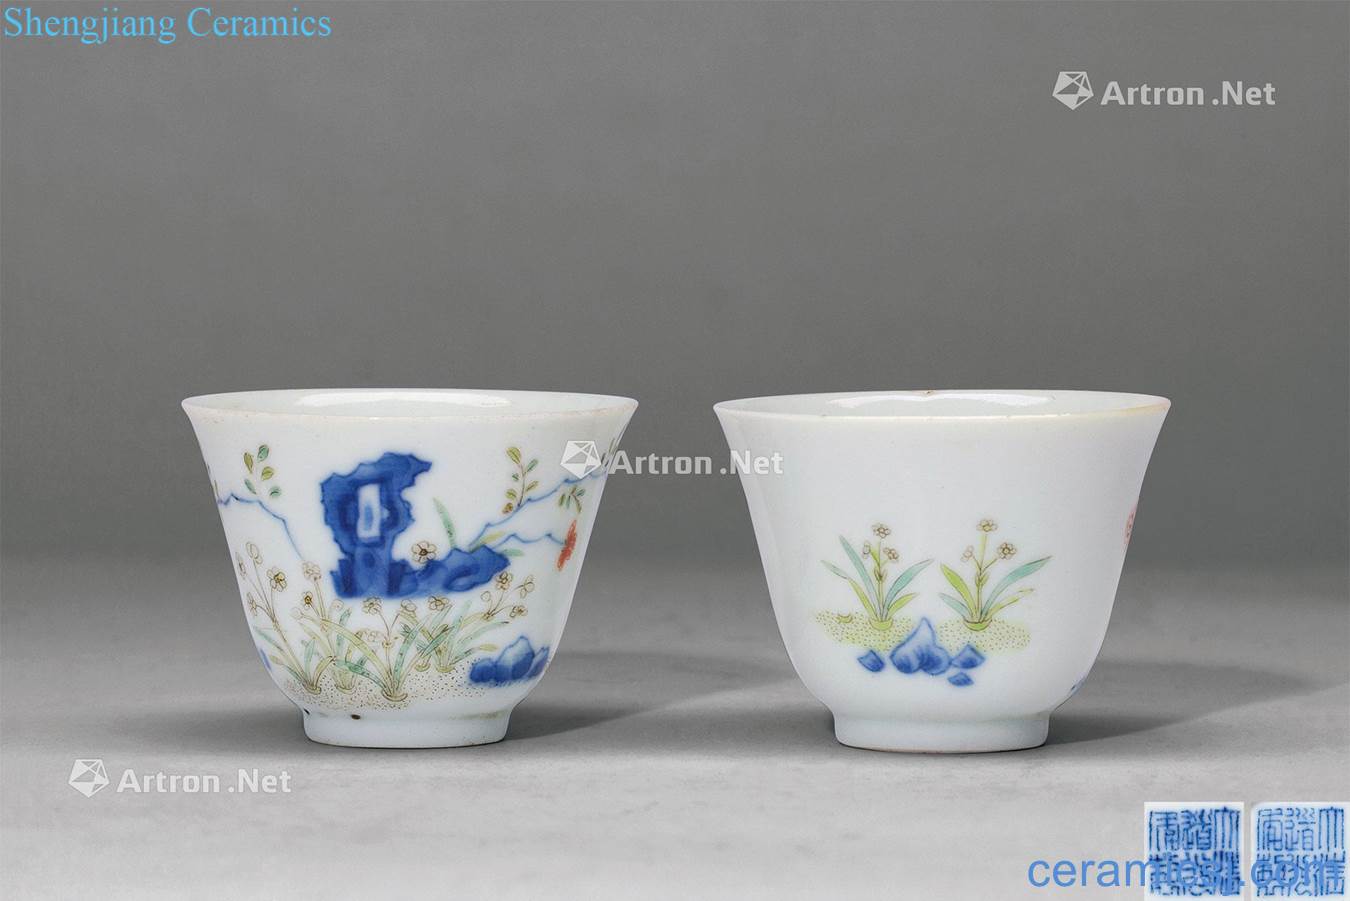 Qing daoguang bucket color orchids cup (a)